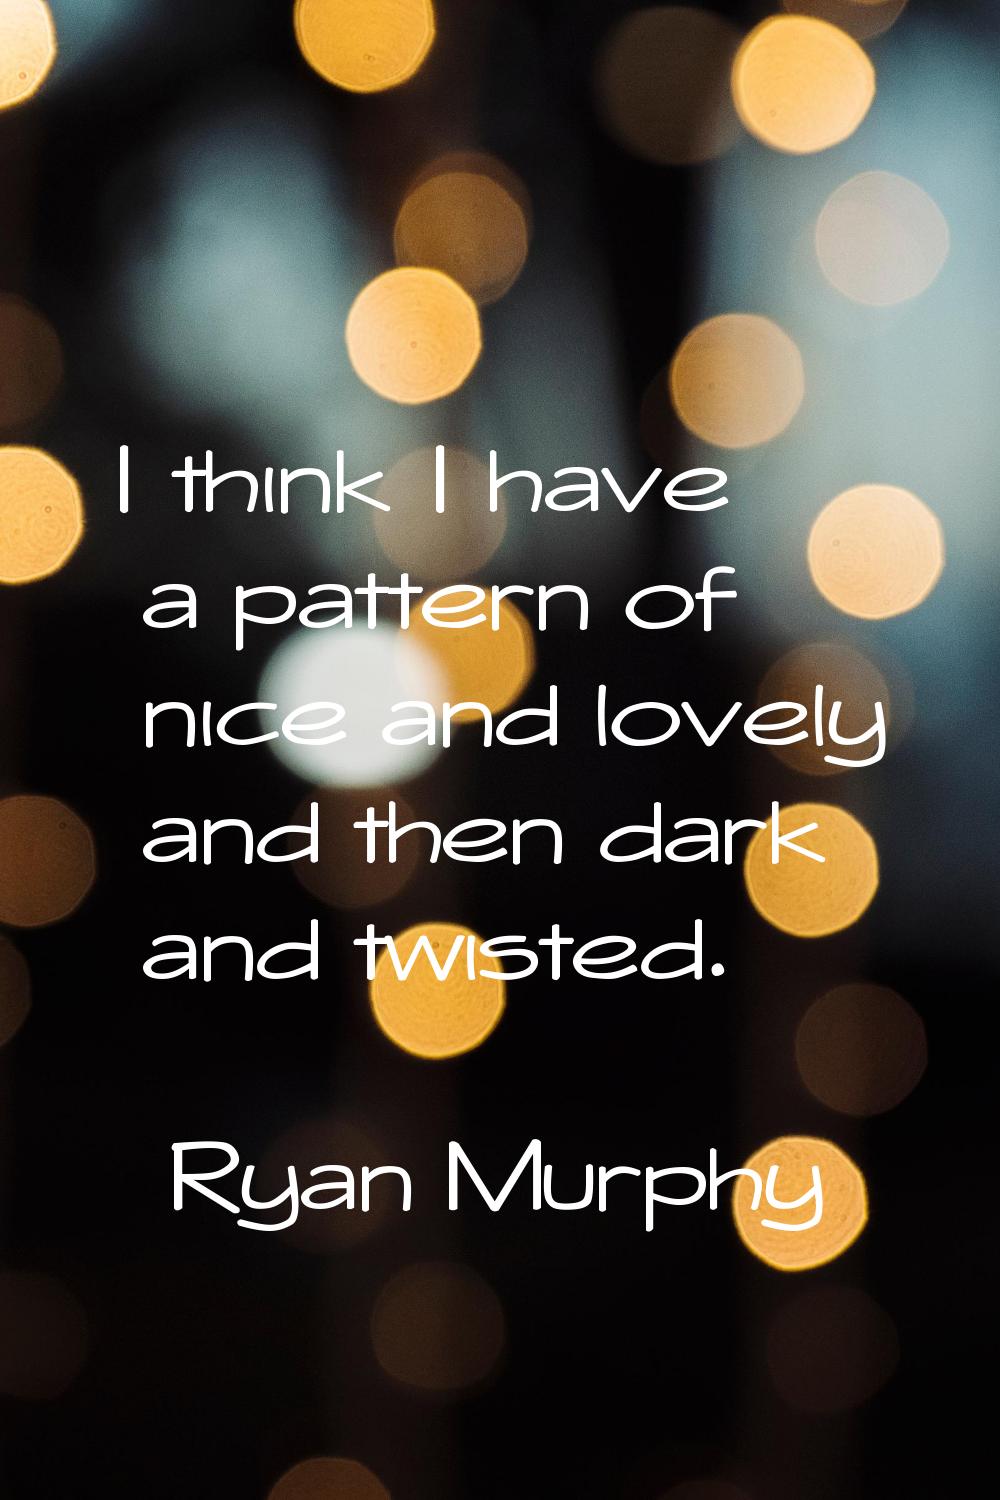 I think I have a pattern of nice and lovely and then dark and twisted.